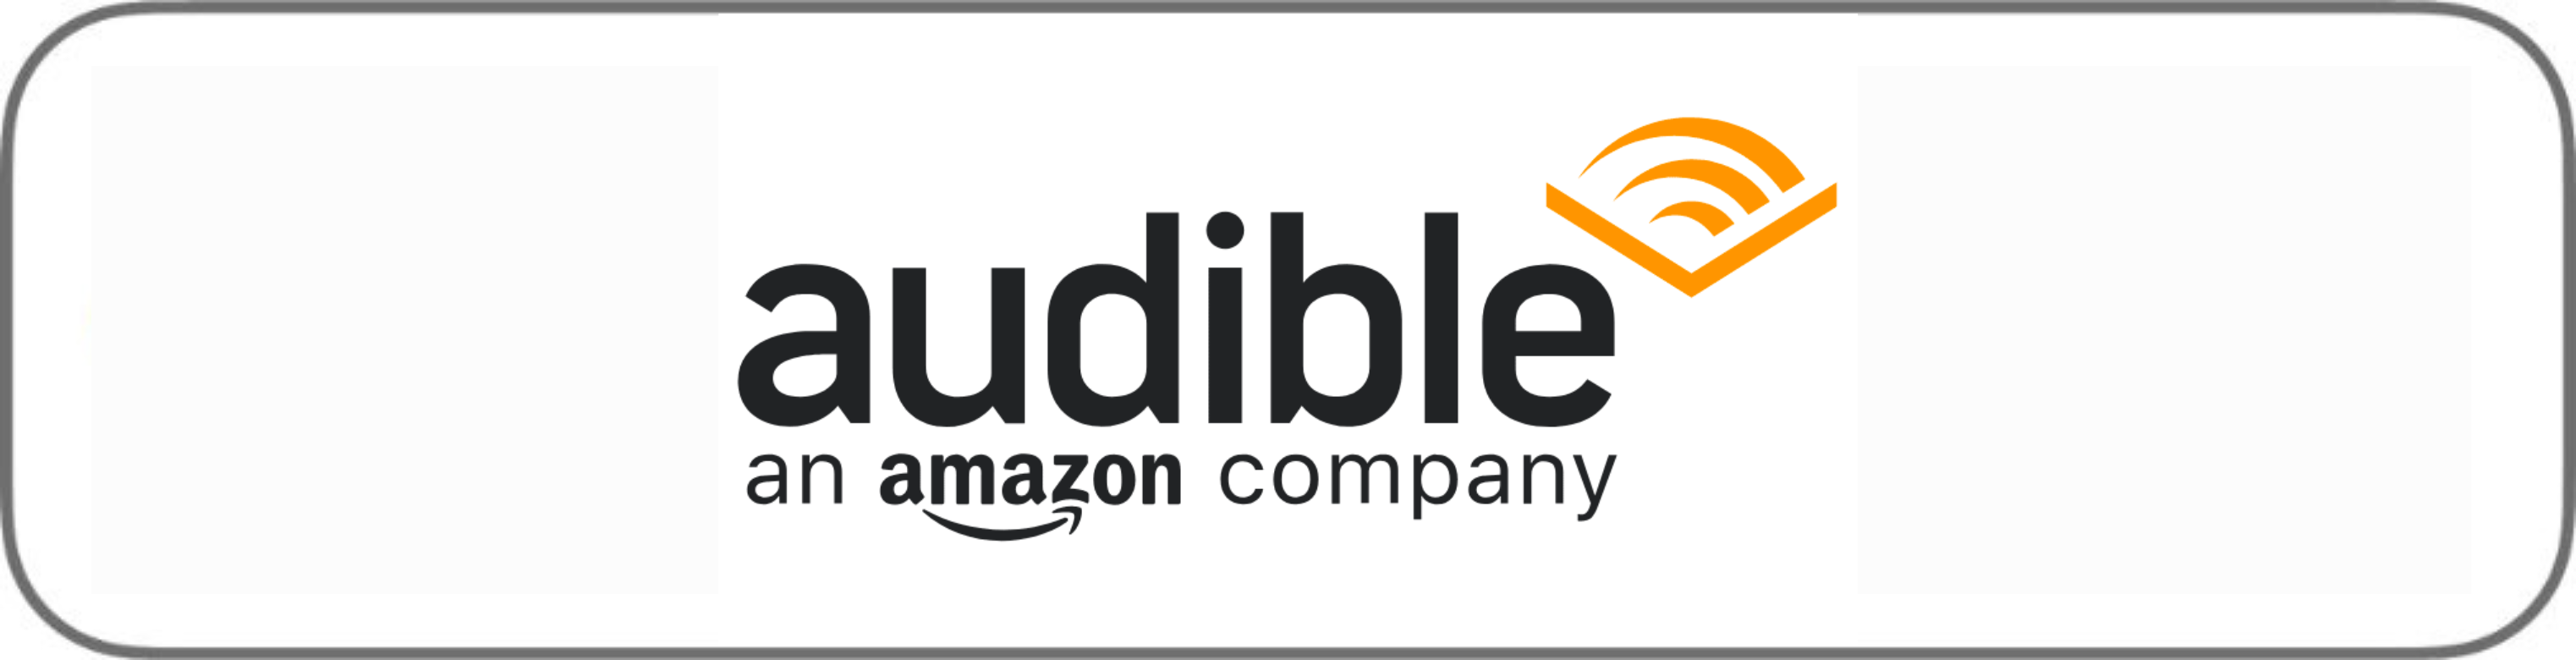 Audible - The Employee Advocacy & Influence Podcast by DSMN8